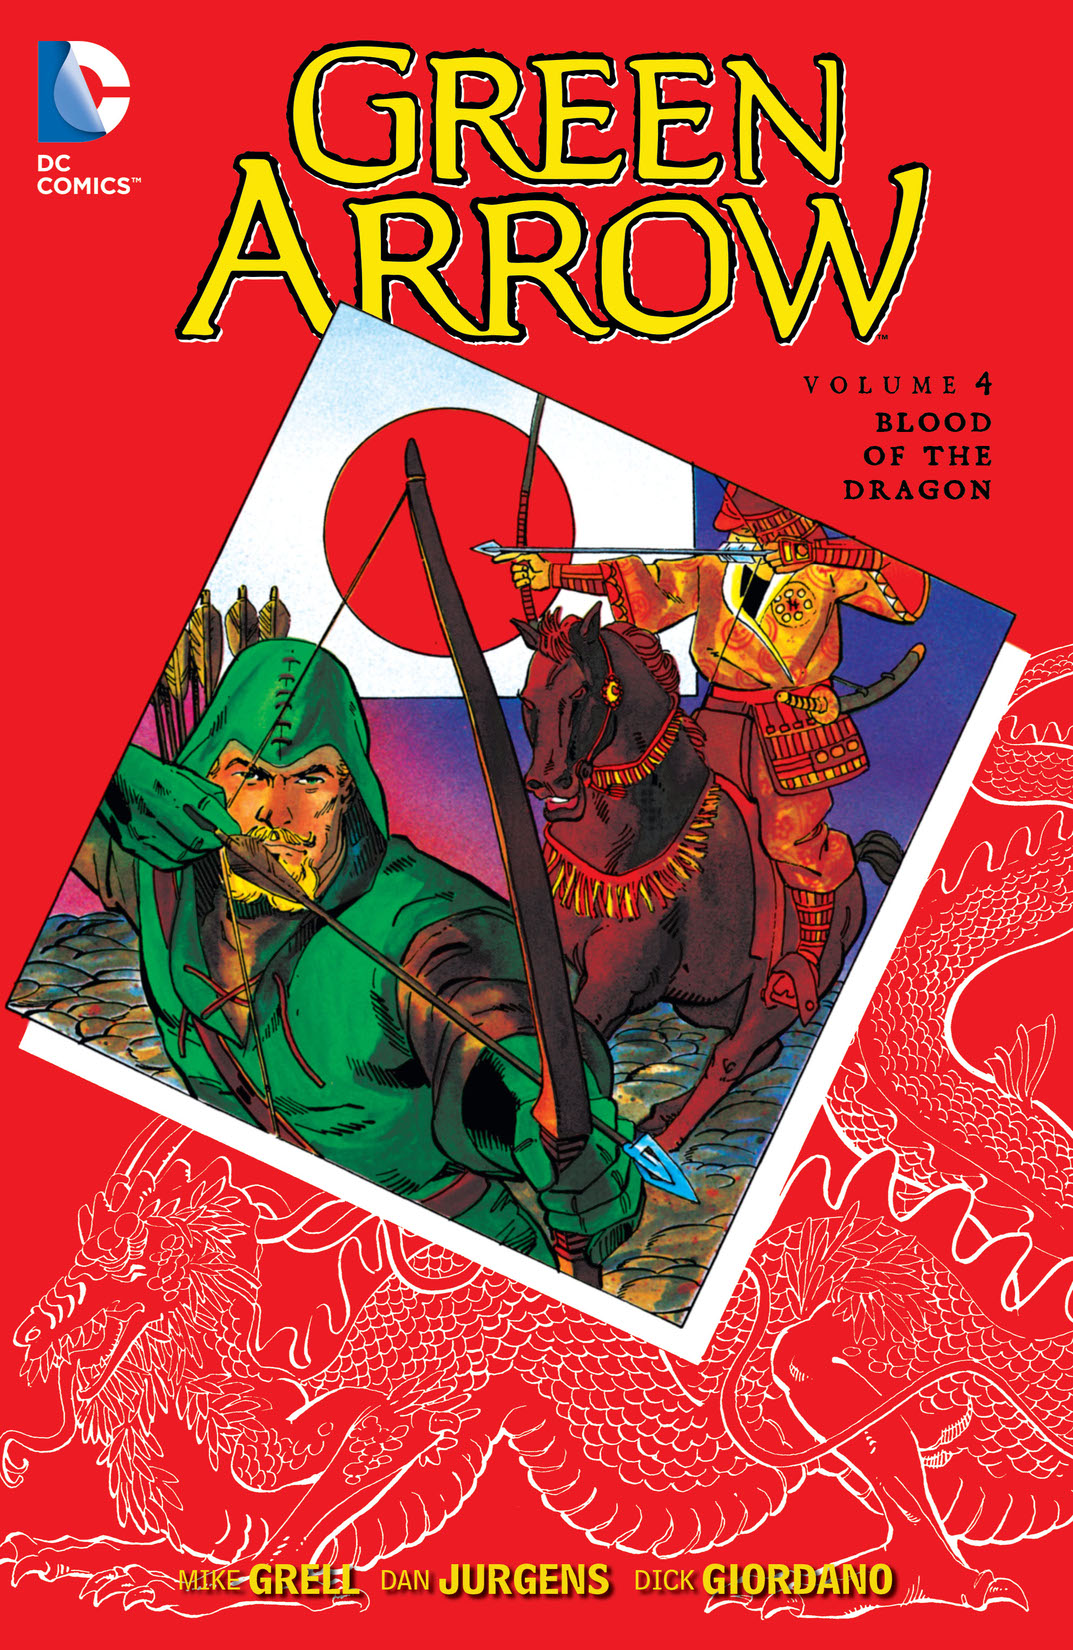 Green Arrow Vol. 4: Blood of the Dragon preview images